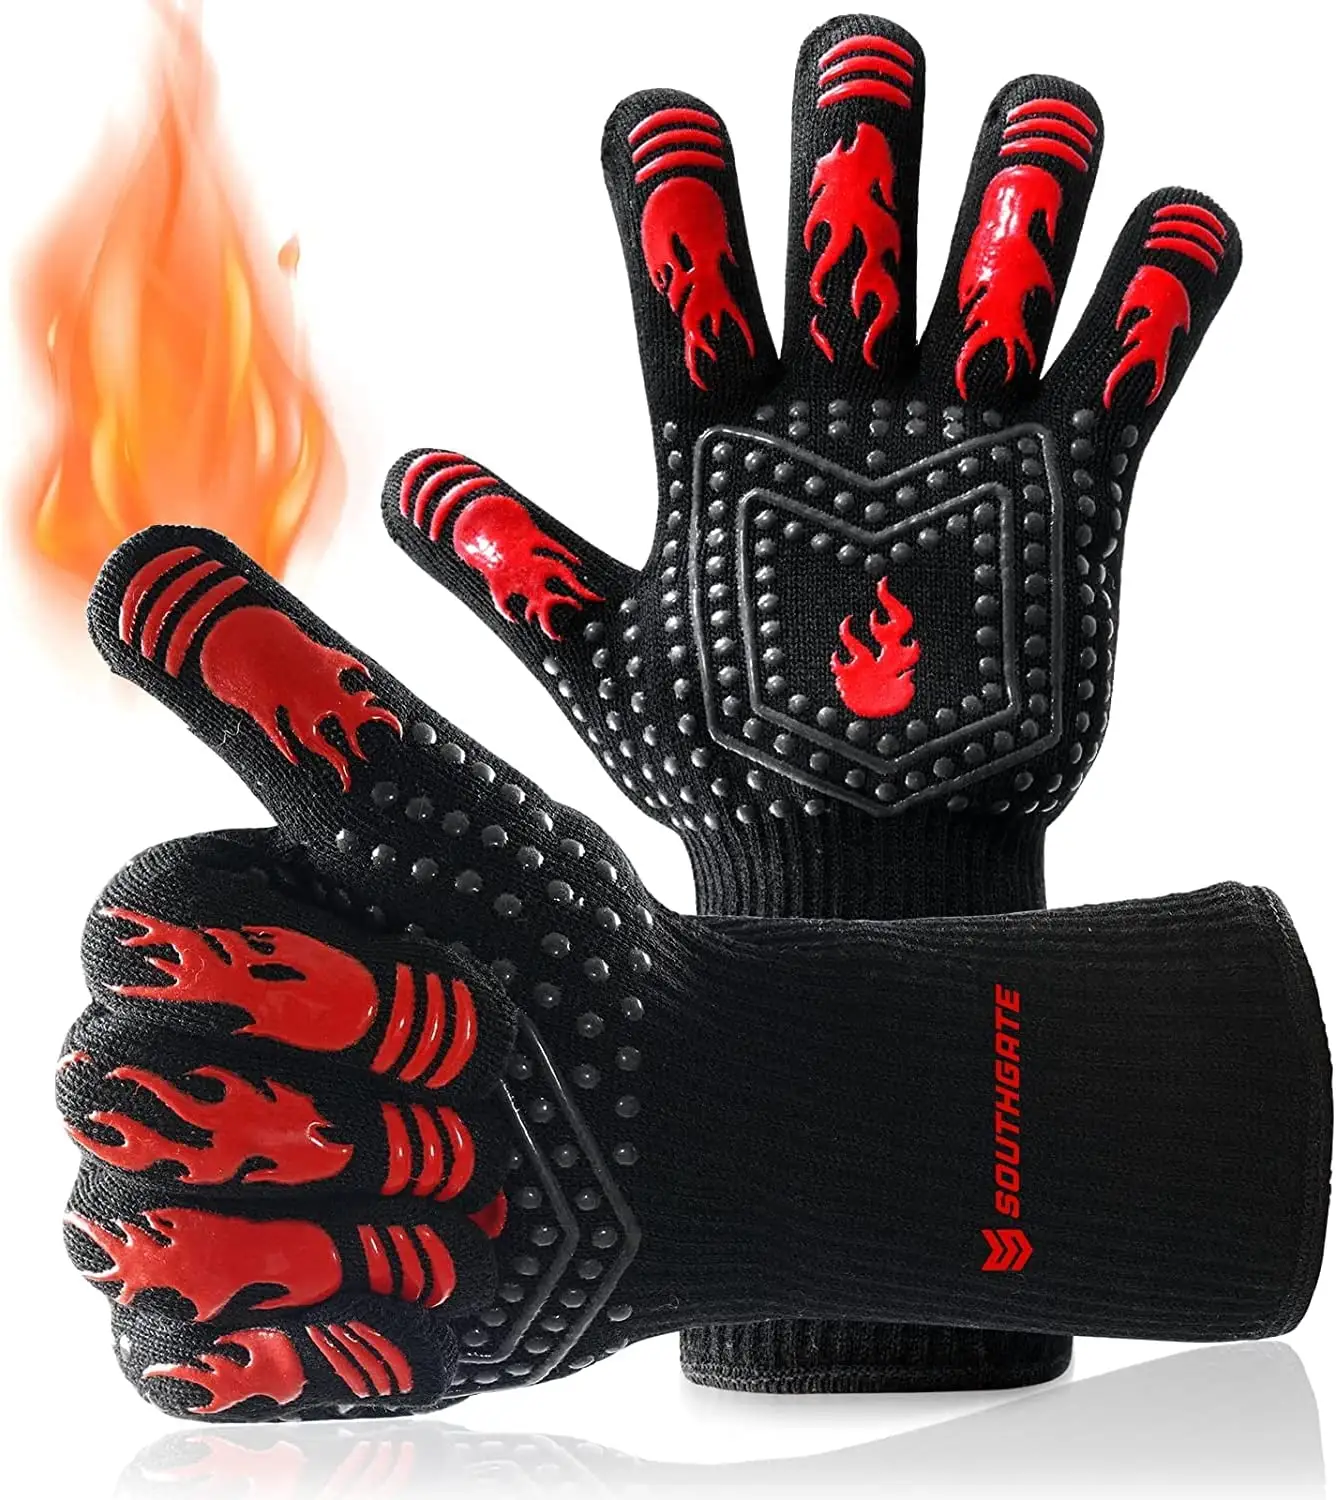 Silicone glove for Cooking